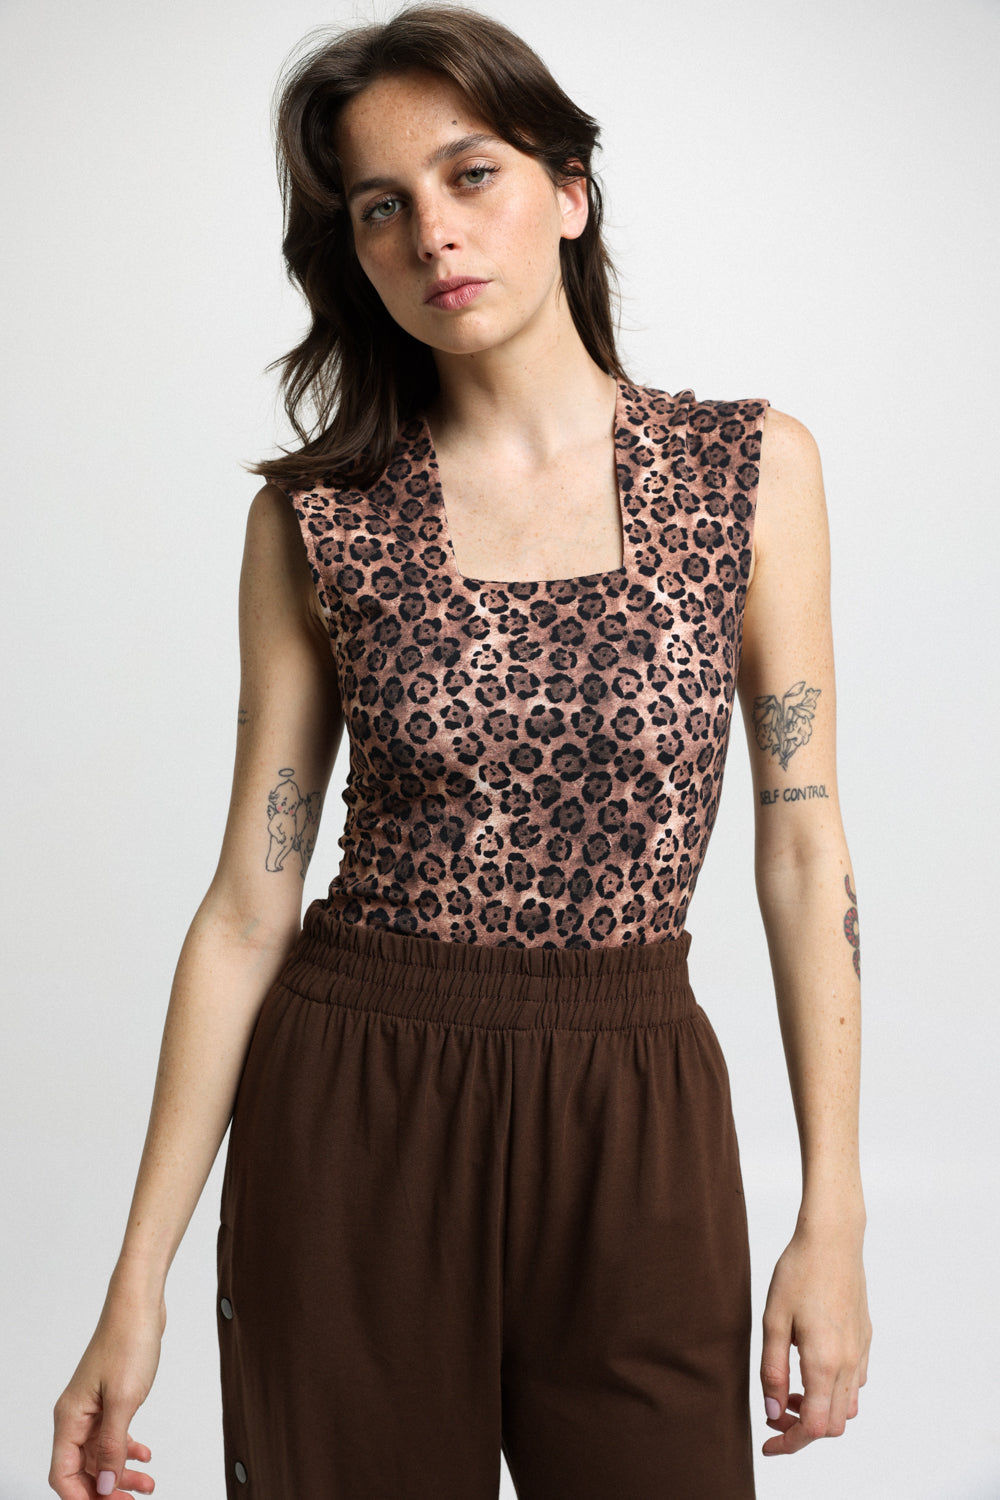 Hold Leopard Top